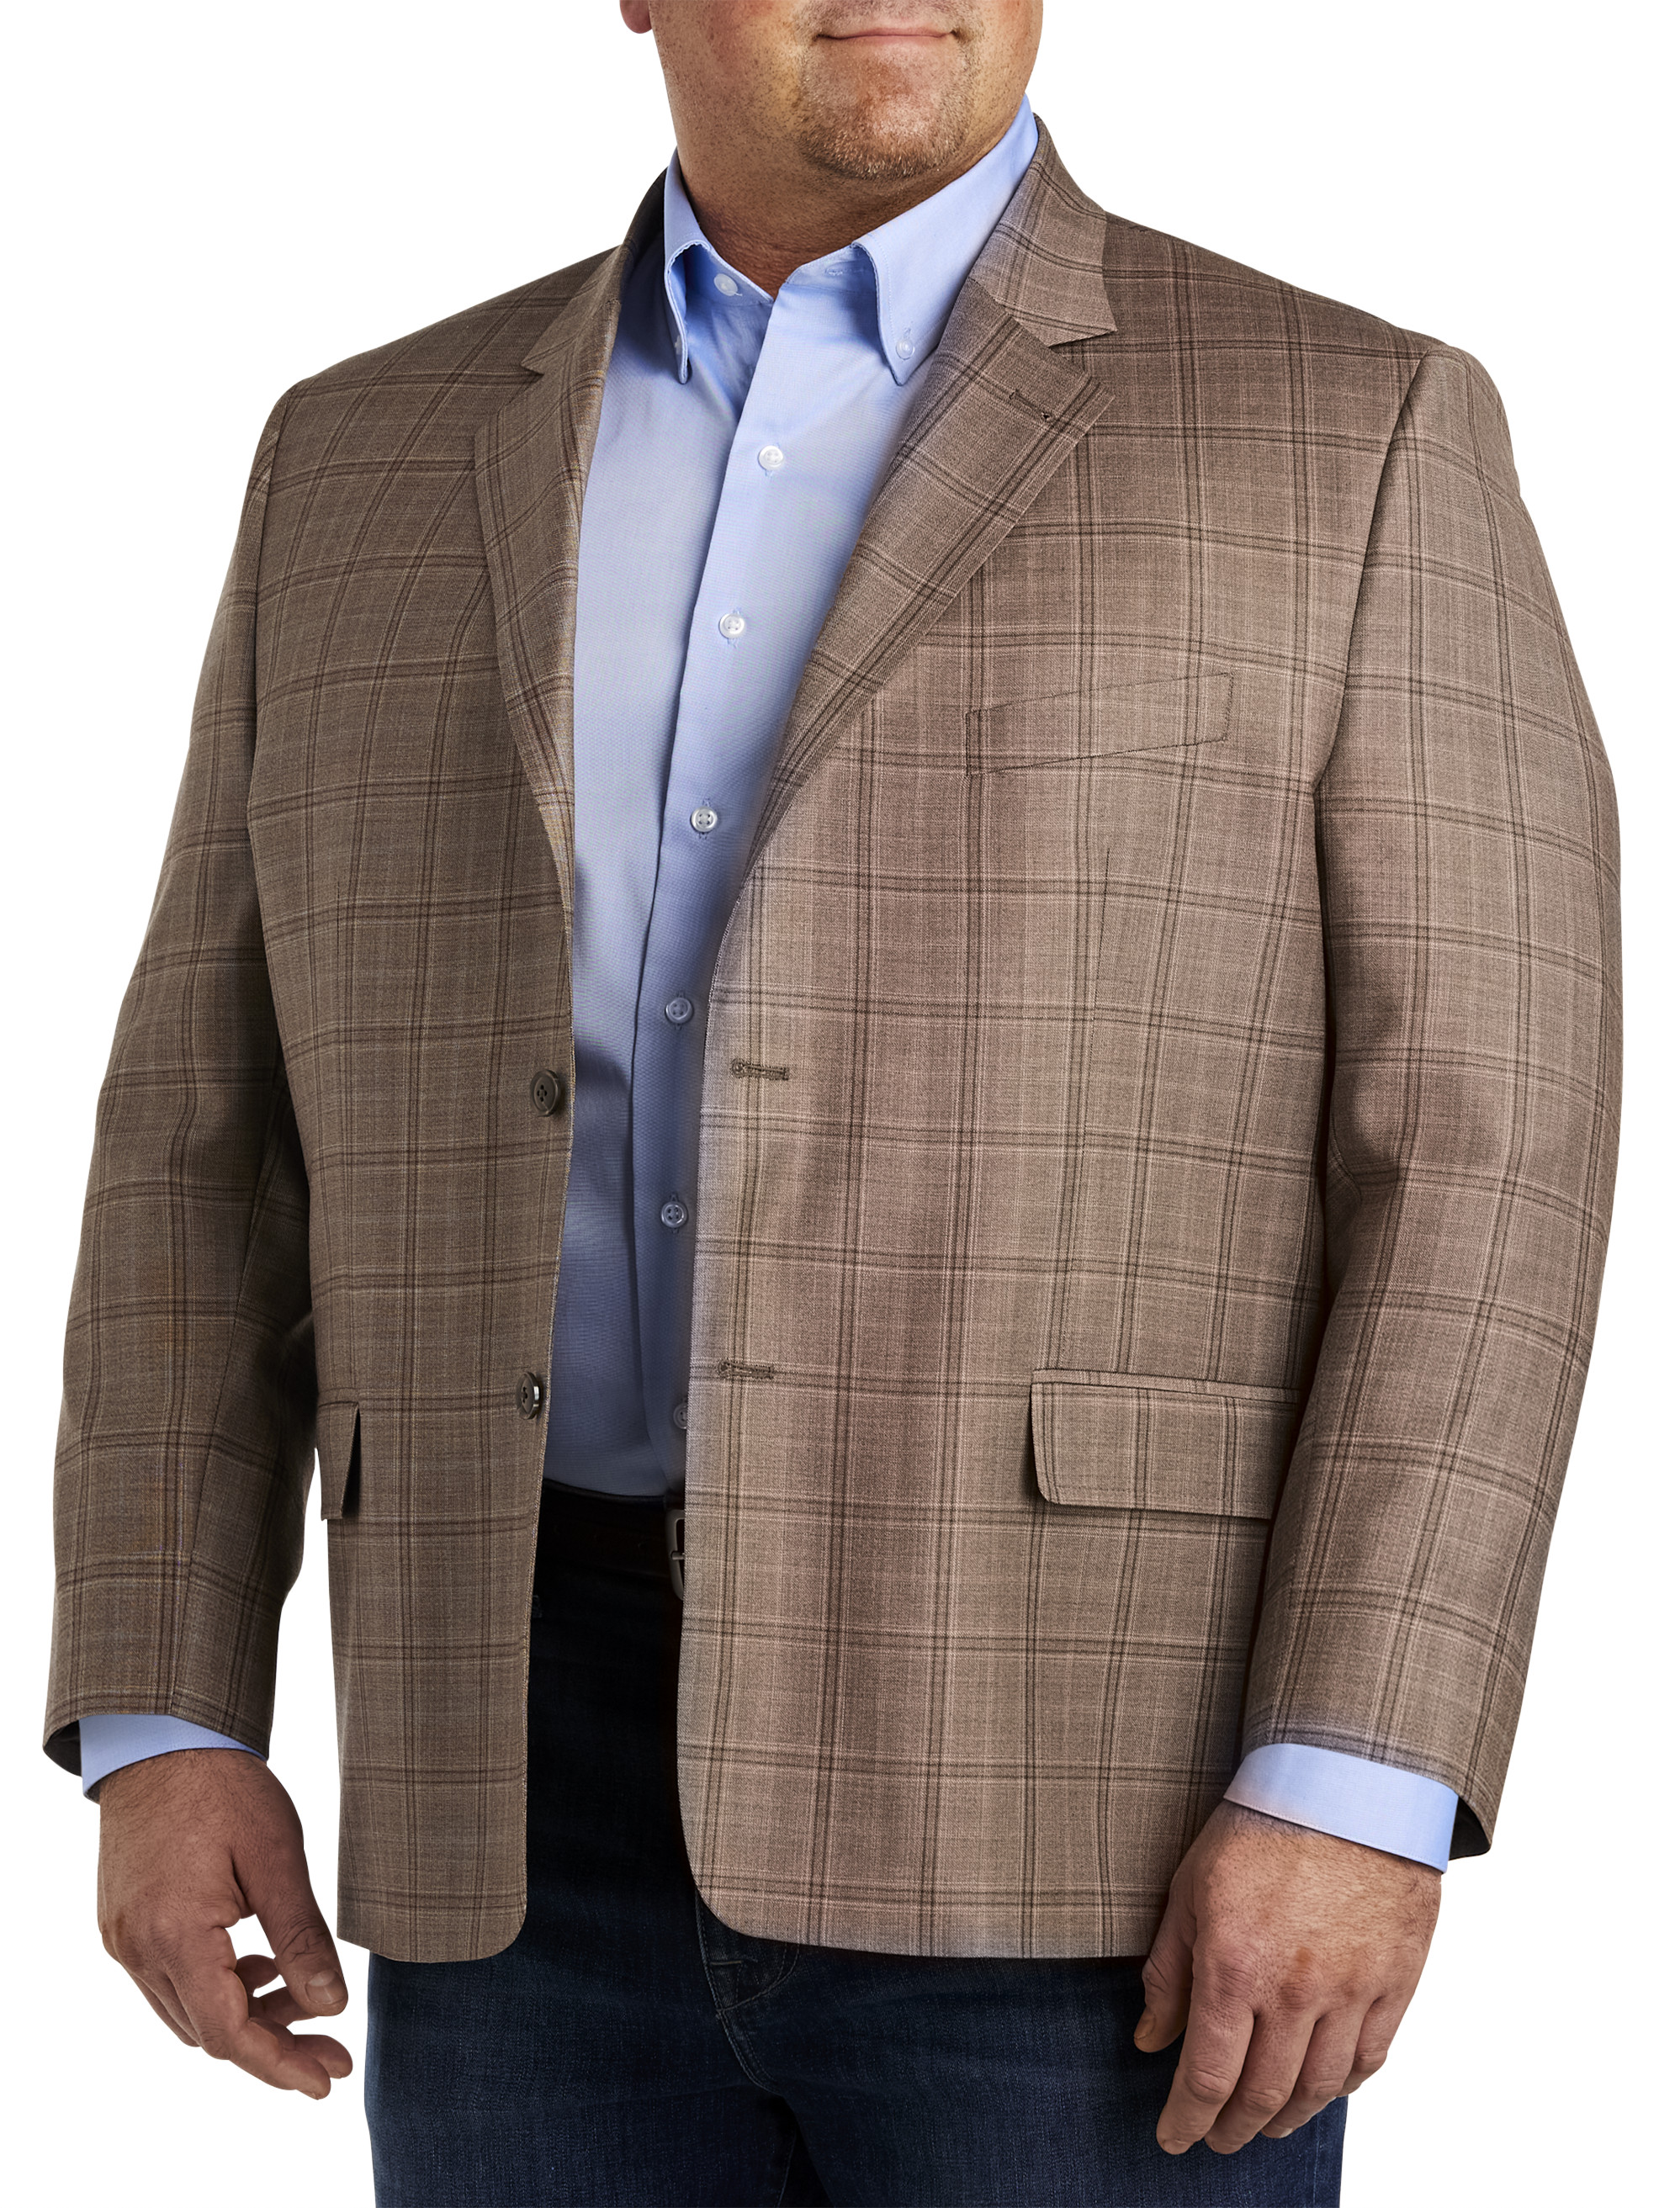 Oak Hill by DXL Men's Big and Tall Jacket Relaxer Windowpane Suit Jacket  Grey 60 L